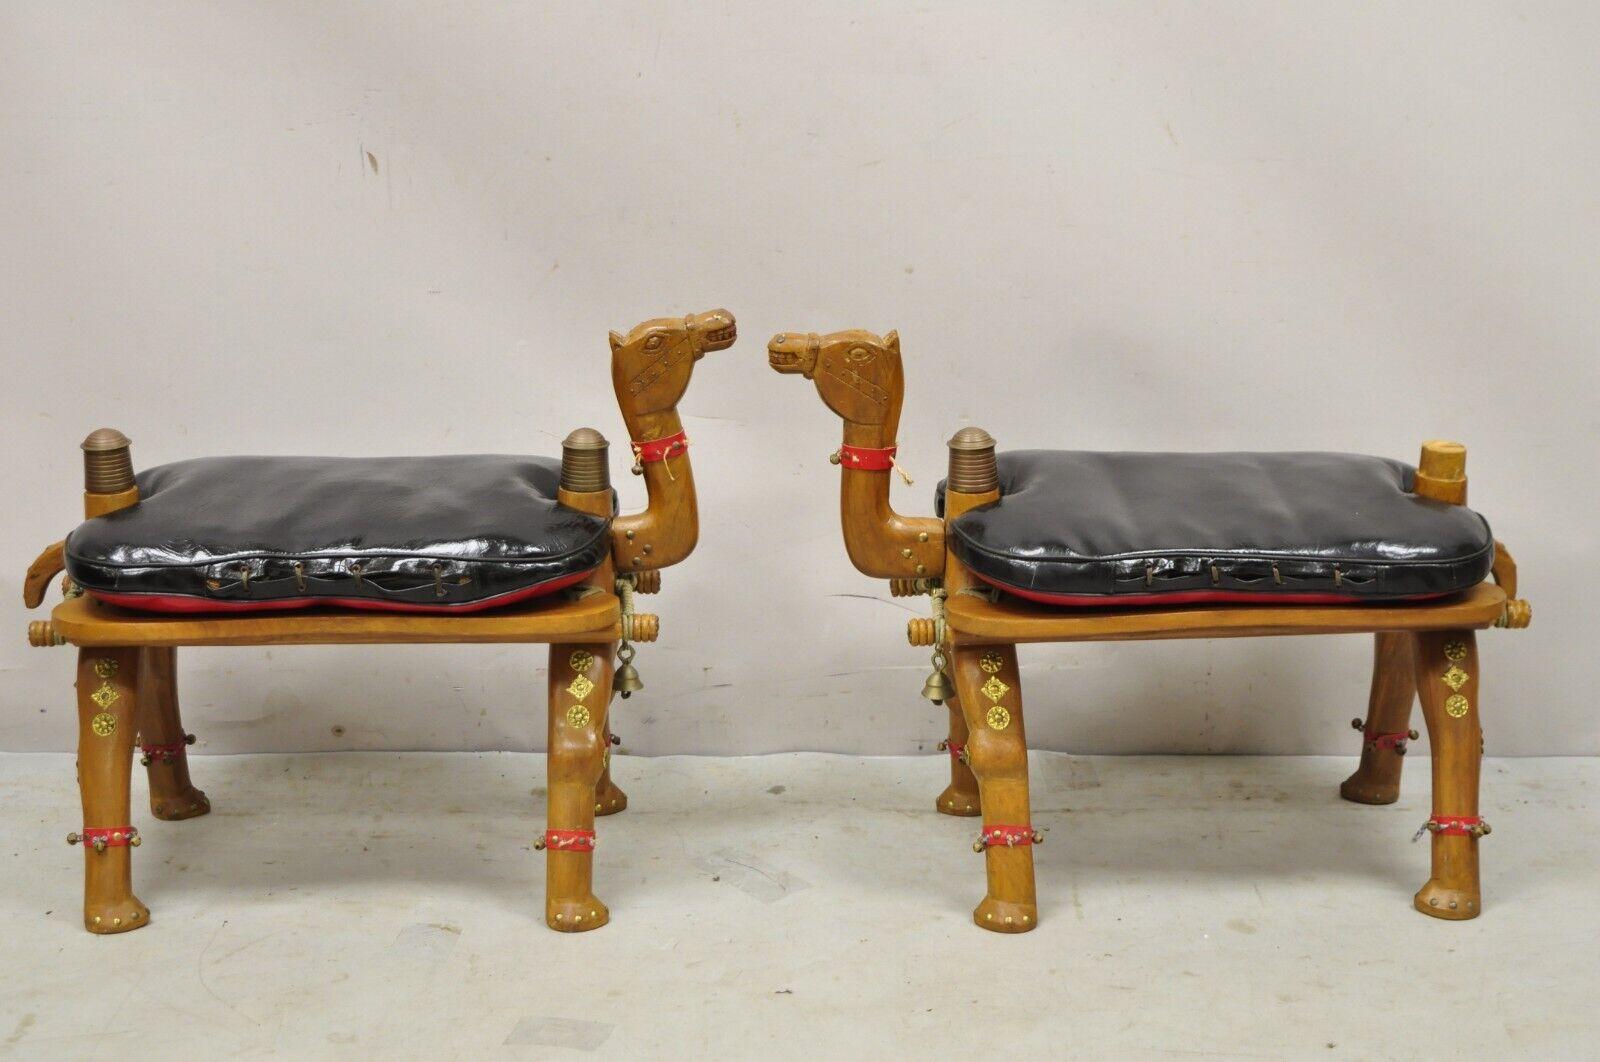 Vintage camel saddle stools carved wood black/red cushions - a pair. Item features a reversible pillow cushion (black/red), carved wood base, metal accents, very nice vintage pair, great style and form. circa mid to late 20th century. Measurements: